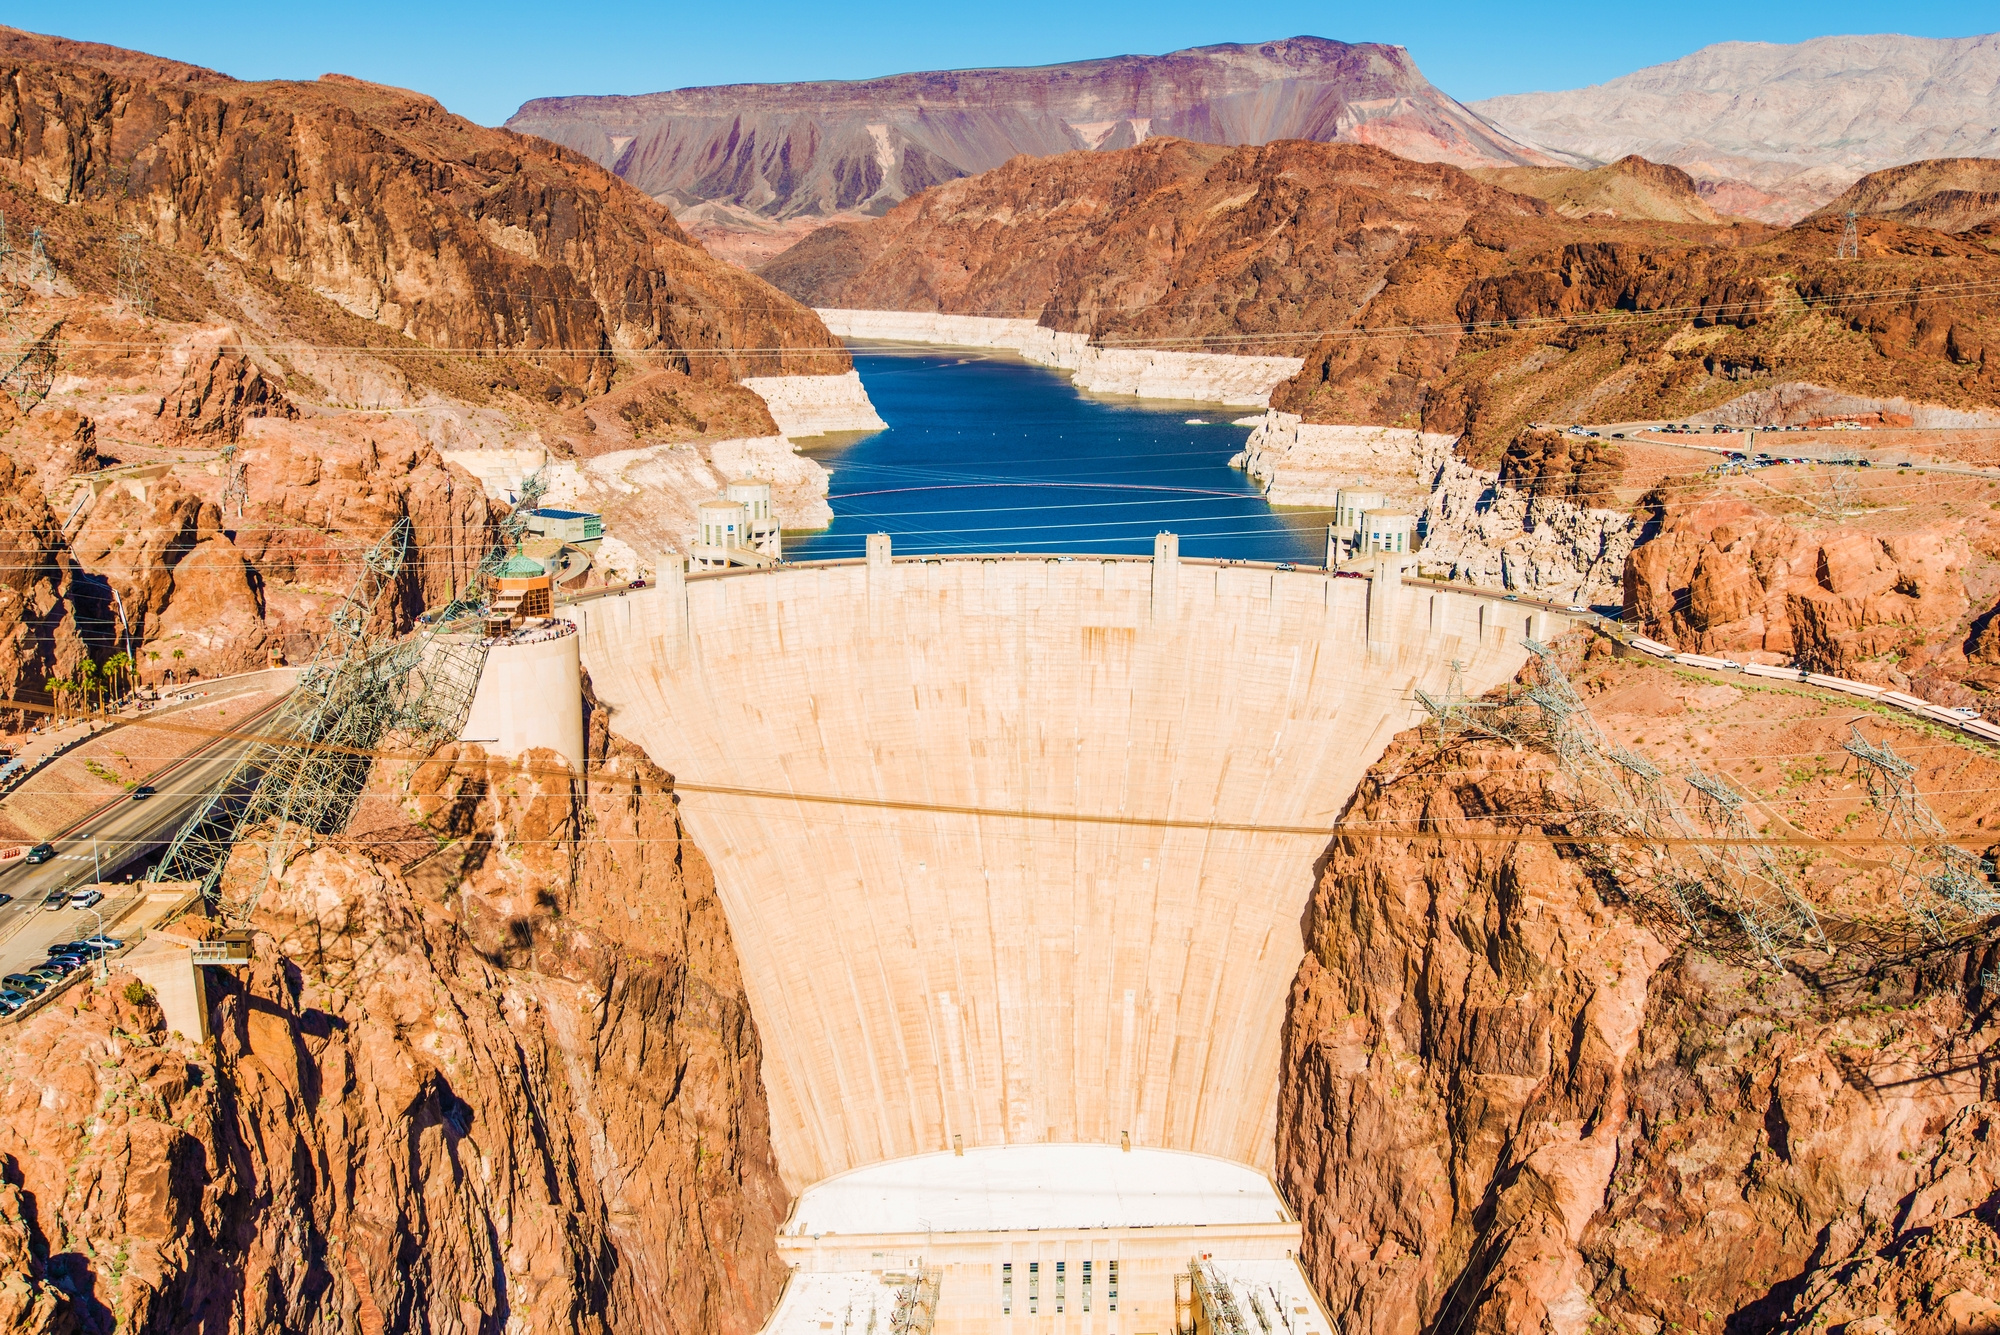 Lake Mead, Water source importance, Drying up concerns, Boing Boing report, 2000x1340 HD Desktop